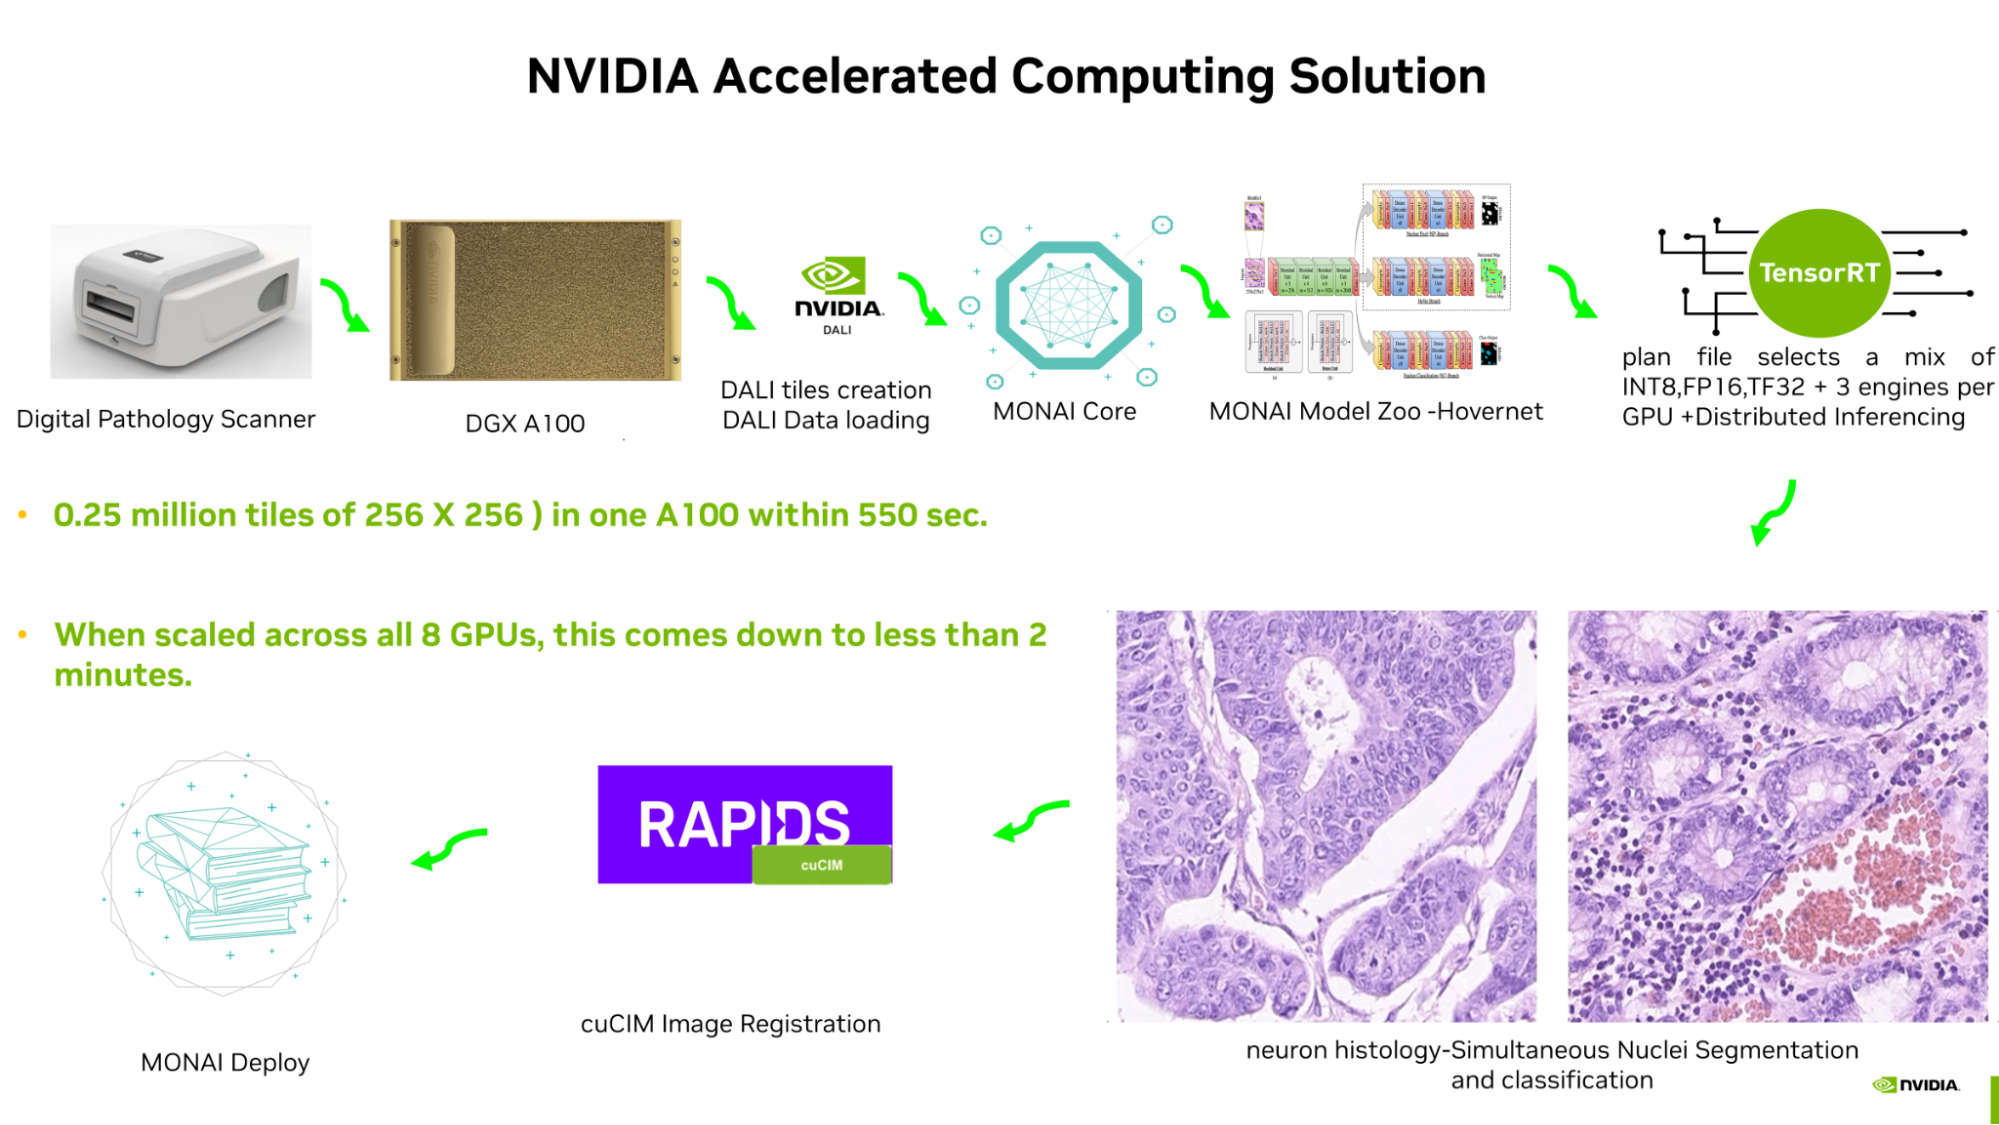 Diagram shows different stages of the NVIDIA accelerated computing workflow for medical imaging, from digital pathology scanner to MONAI Deploy.